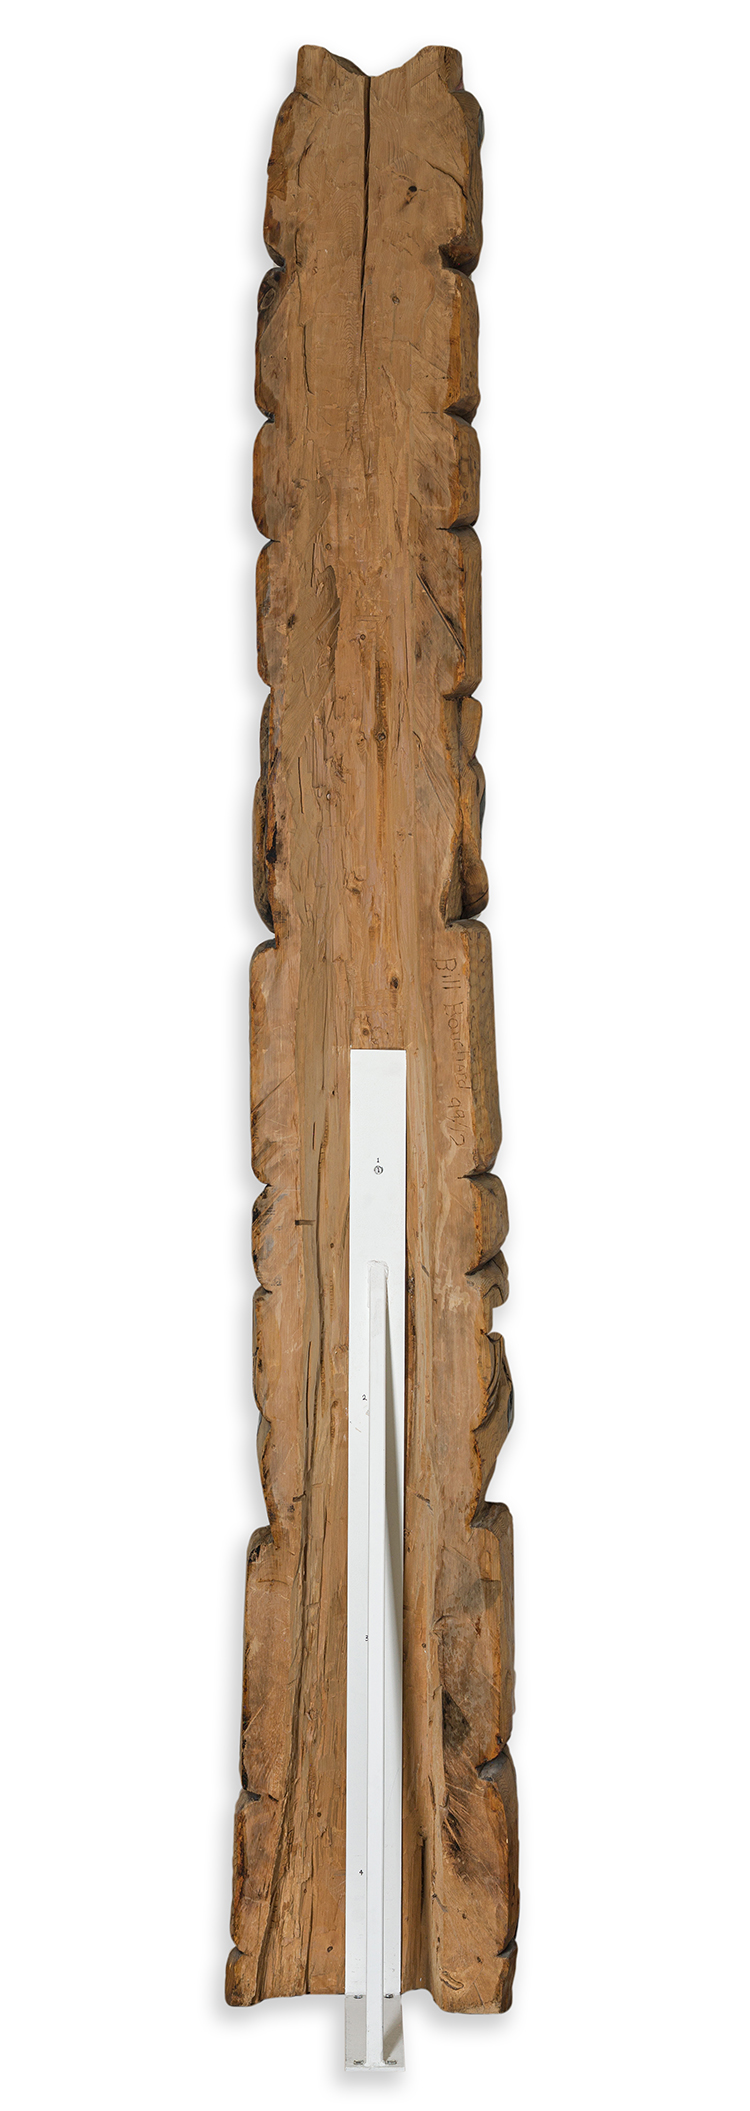 Pacific Northwest Coast Style Totem by Bill Bouchard